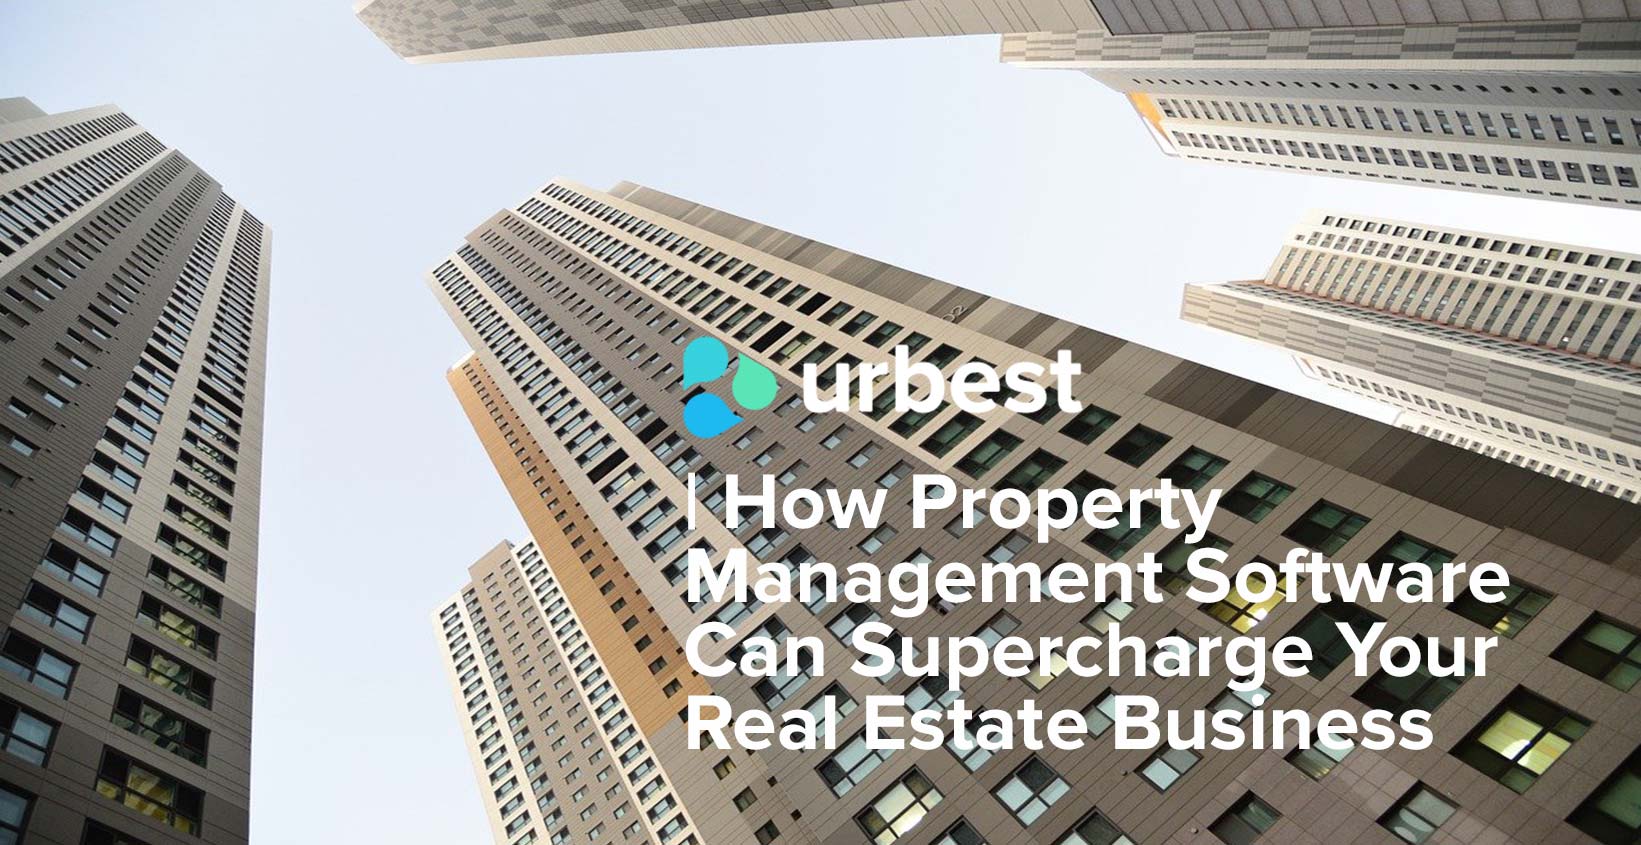 How Property Management Software Can Supercharge Your Real Estate Business